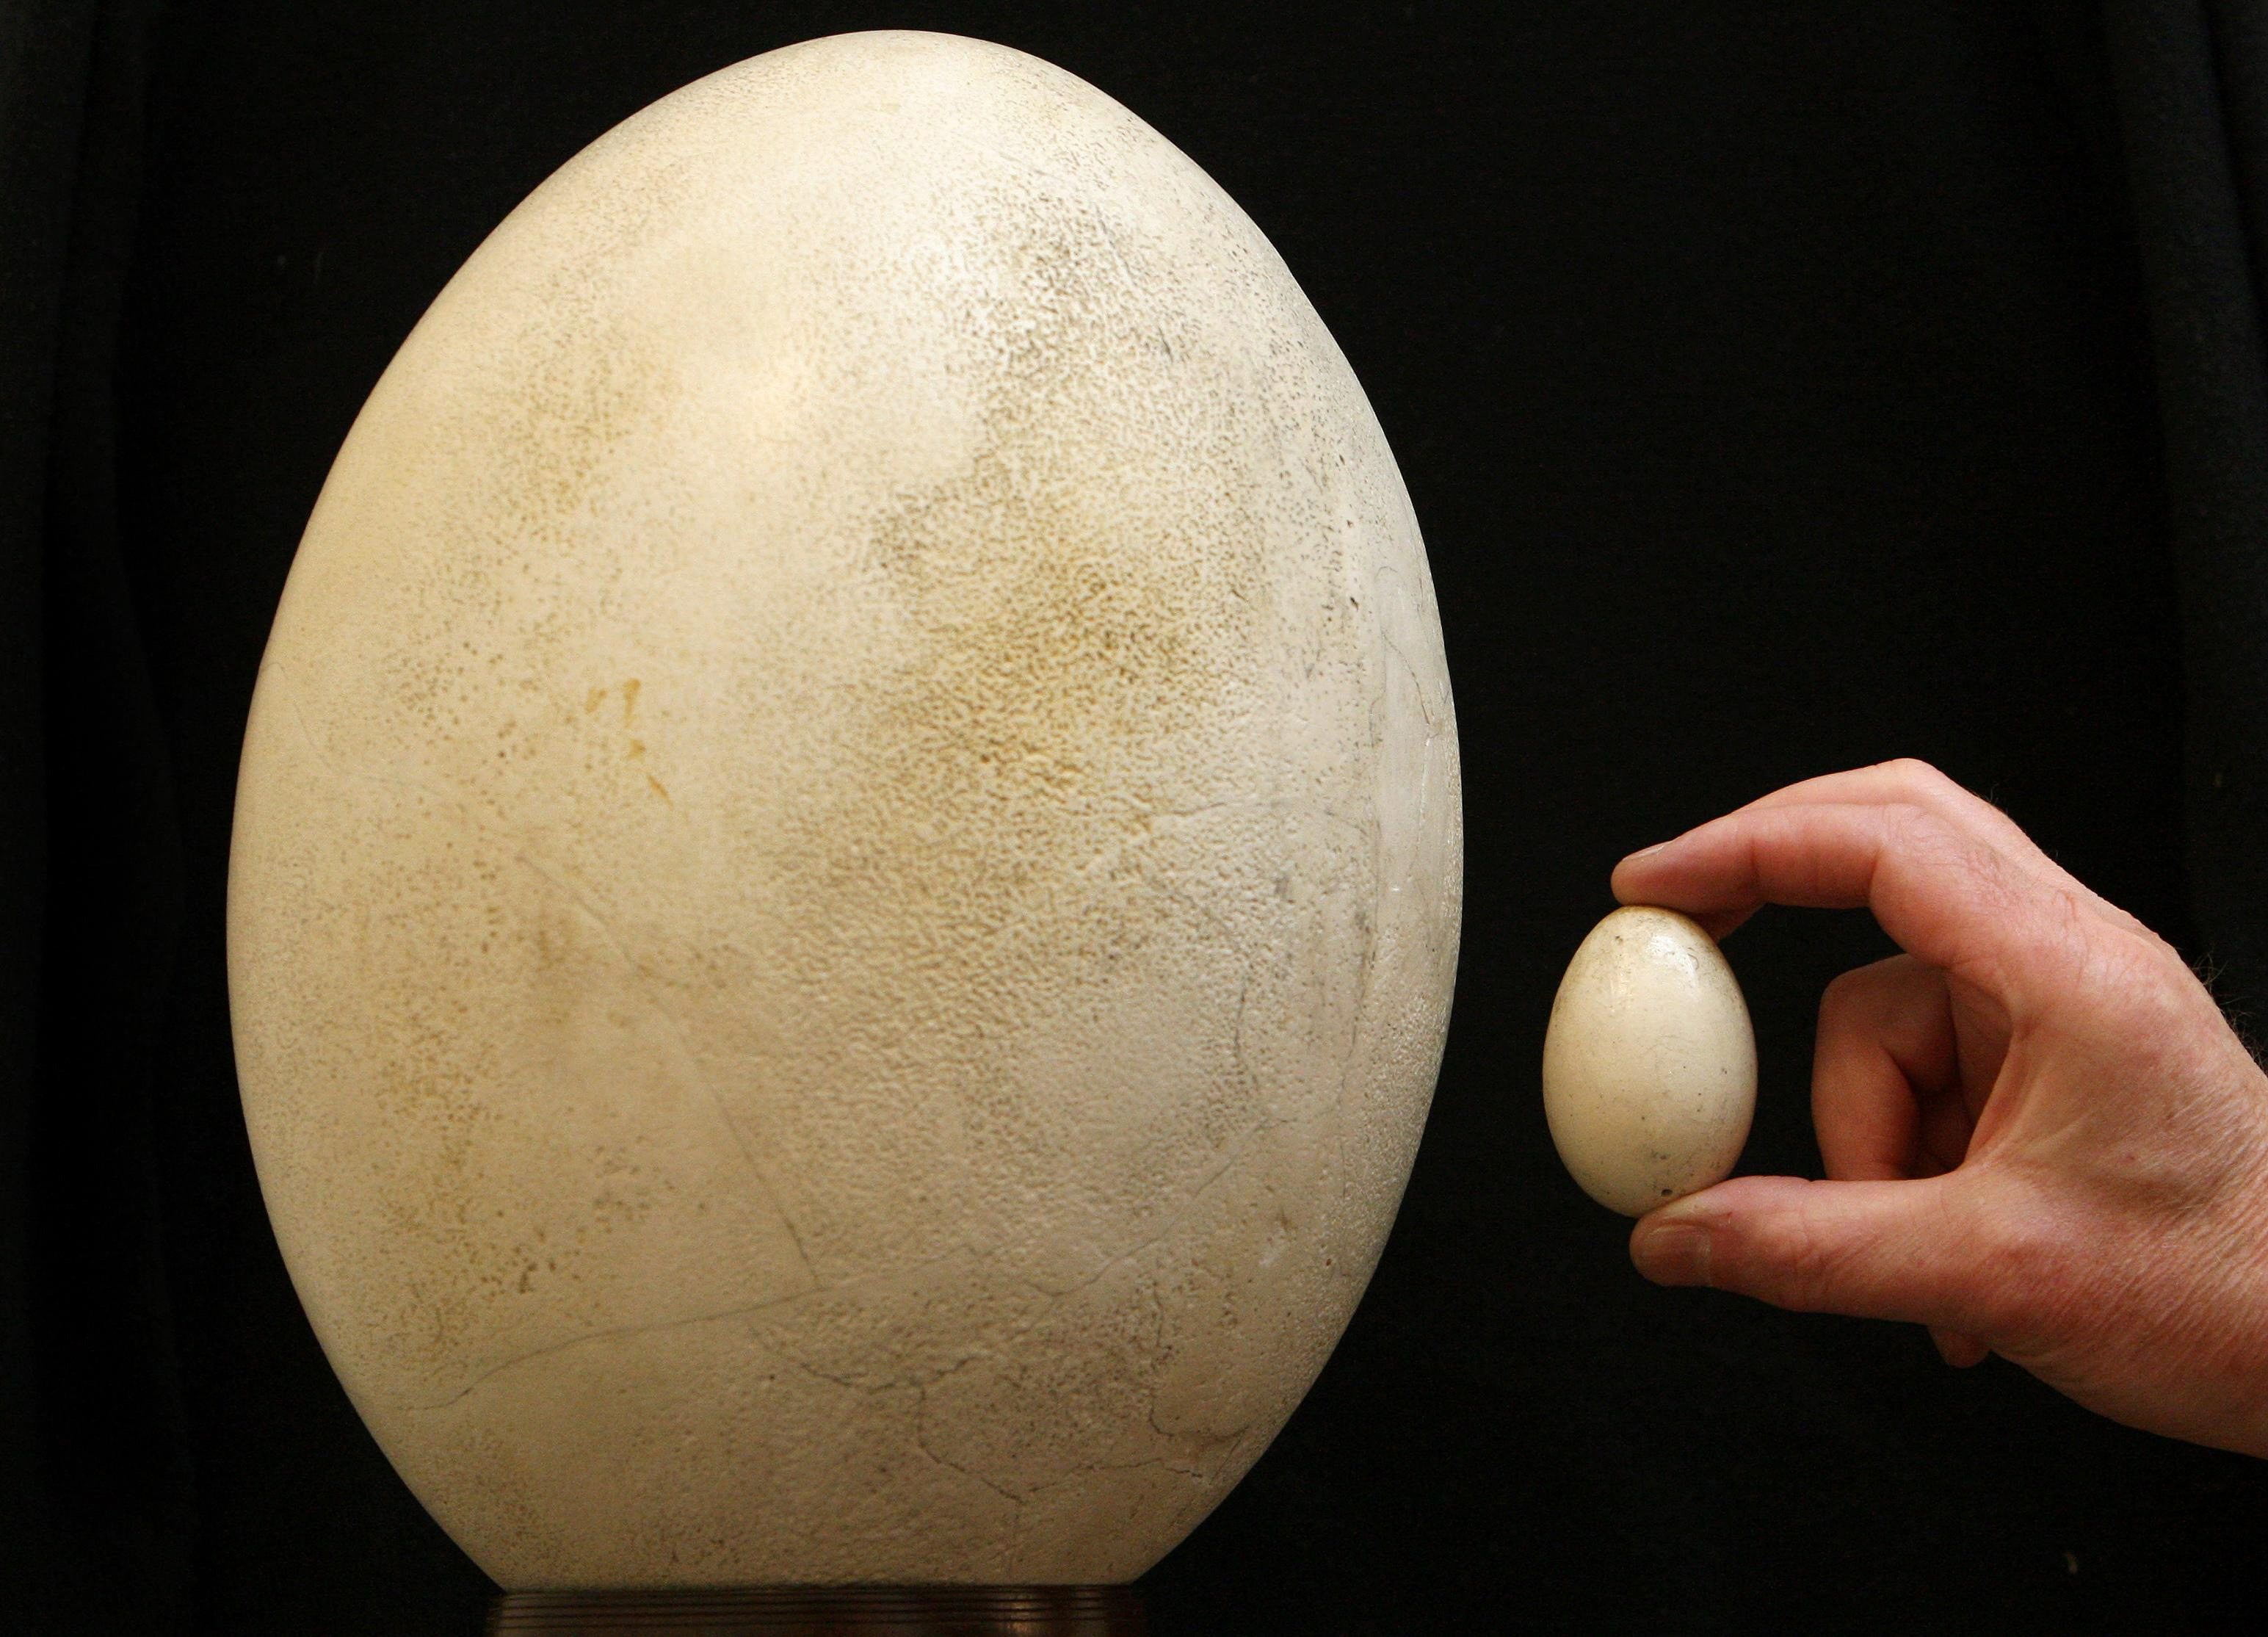 Giant egg fetches giant price at auction